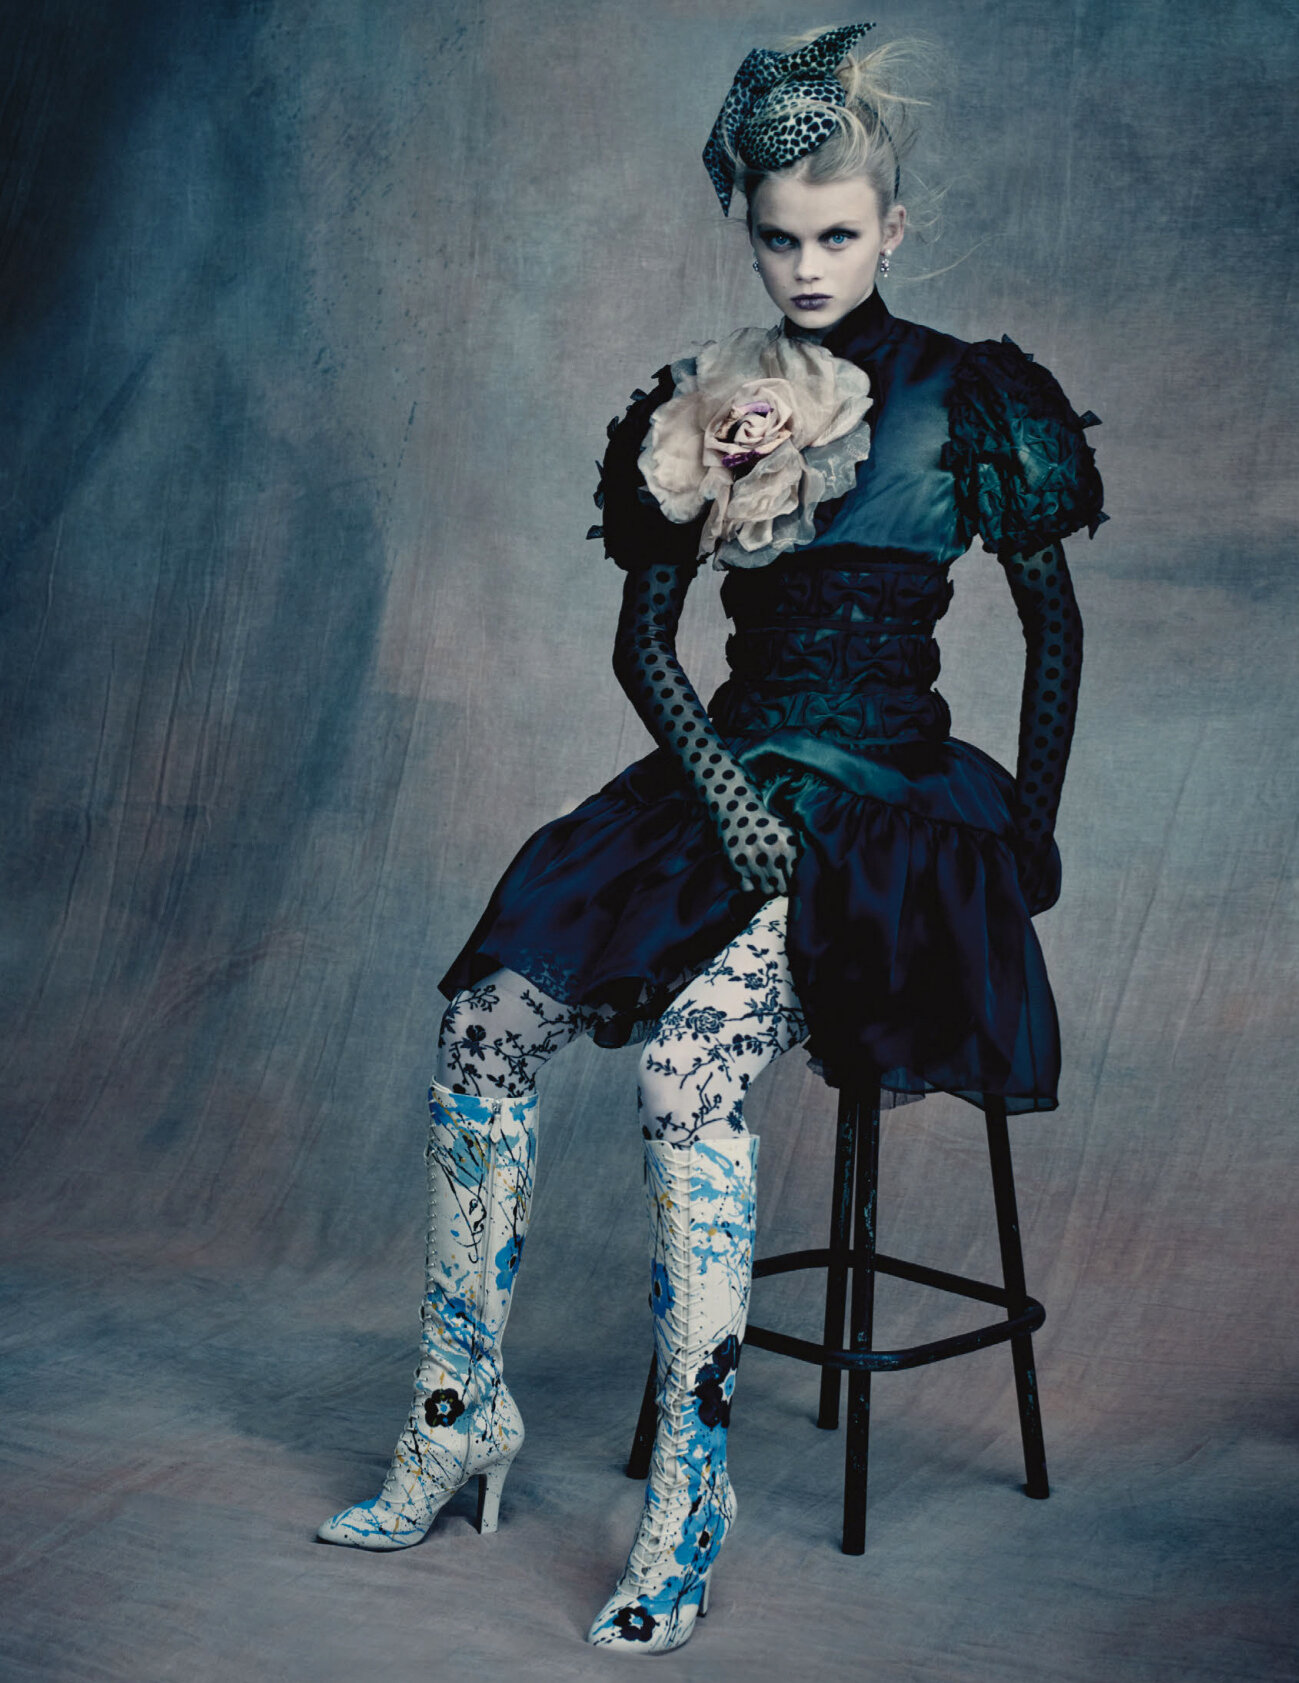 Paolo Roversi for Vogue UK June 2020 (1).jpg